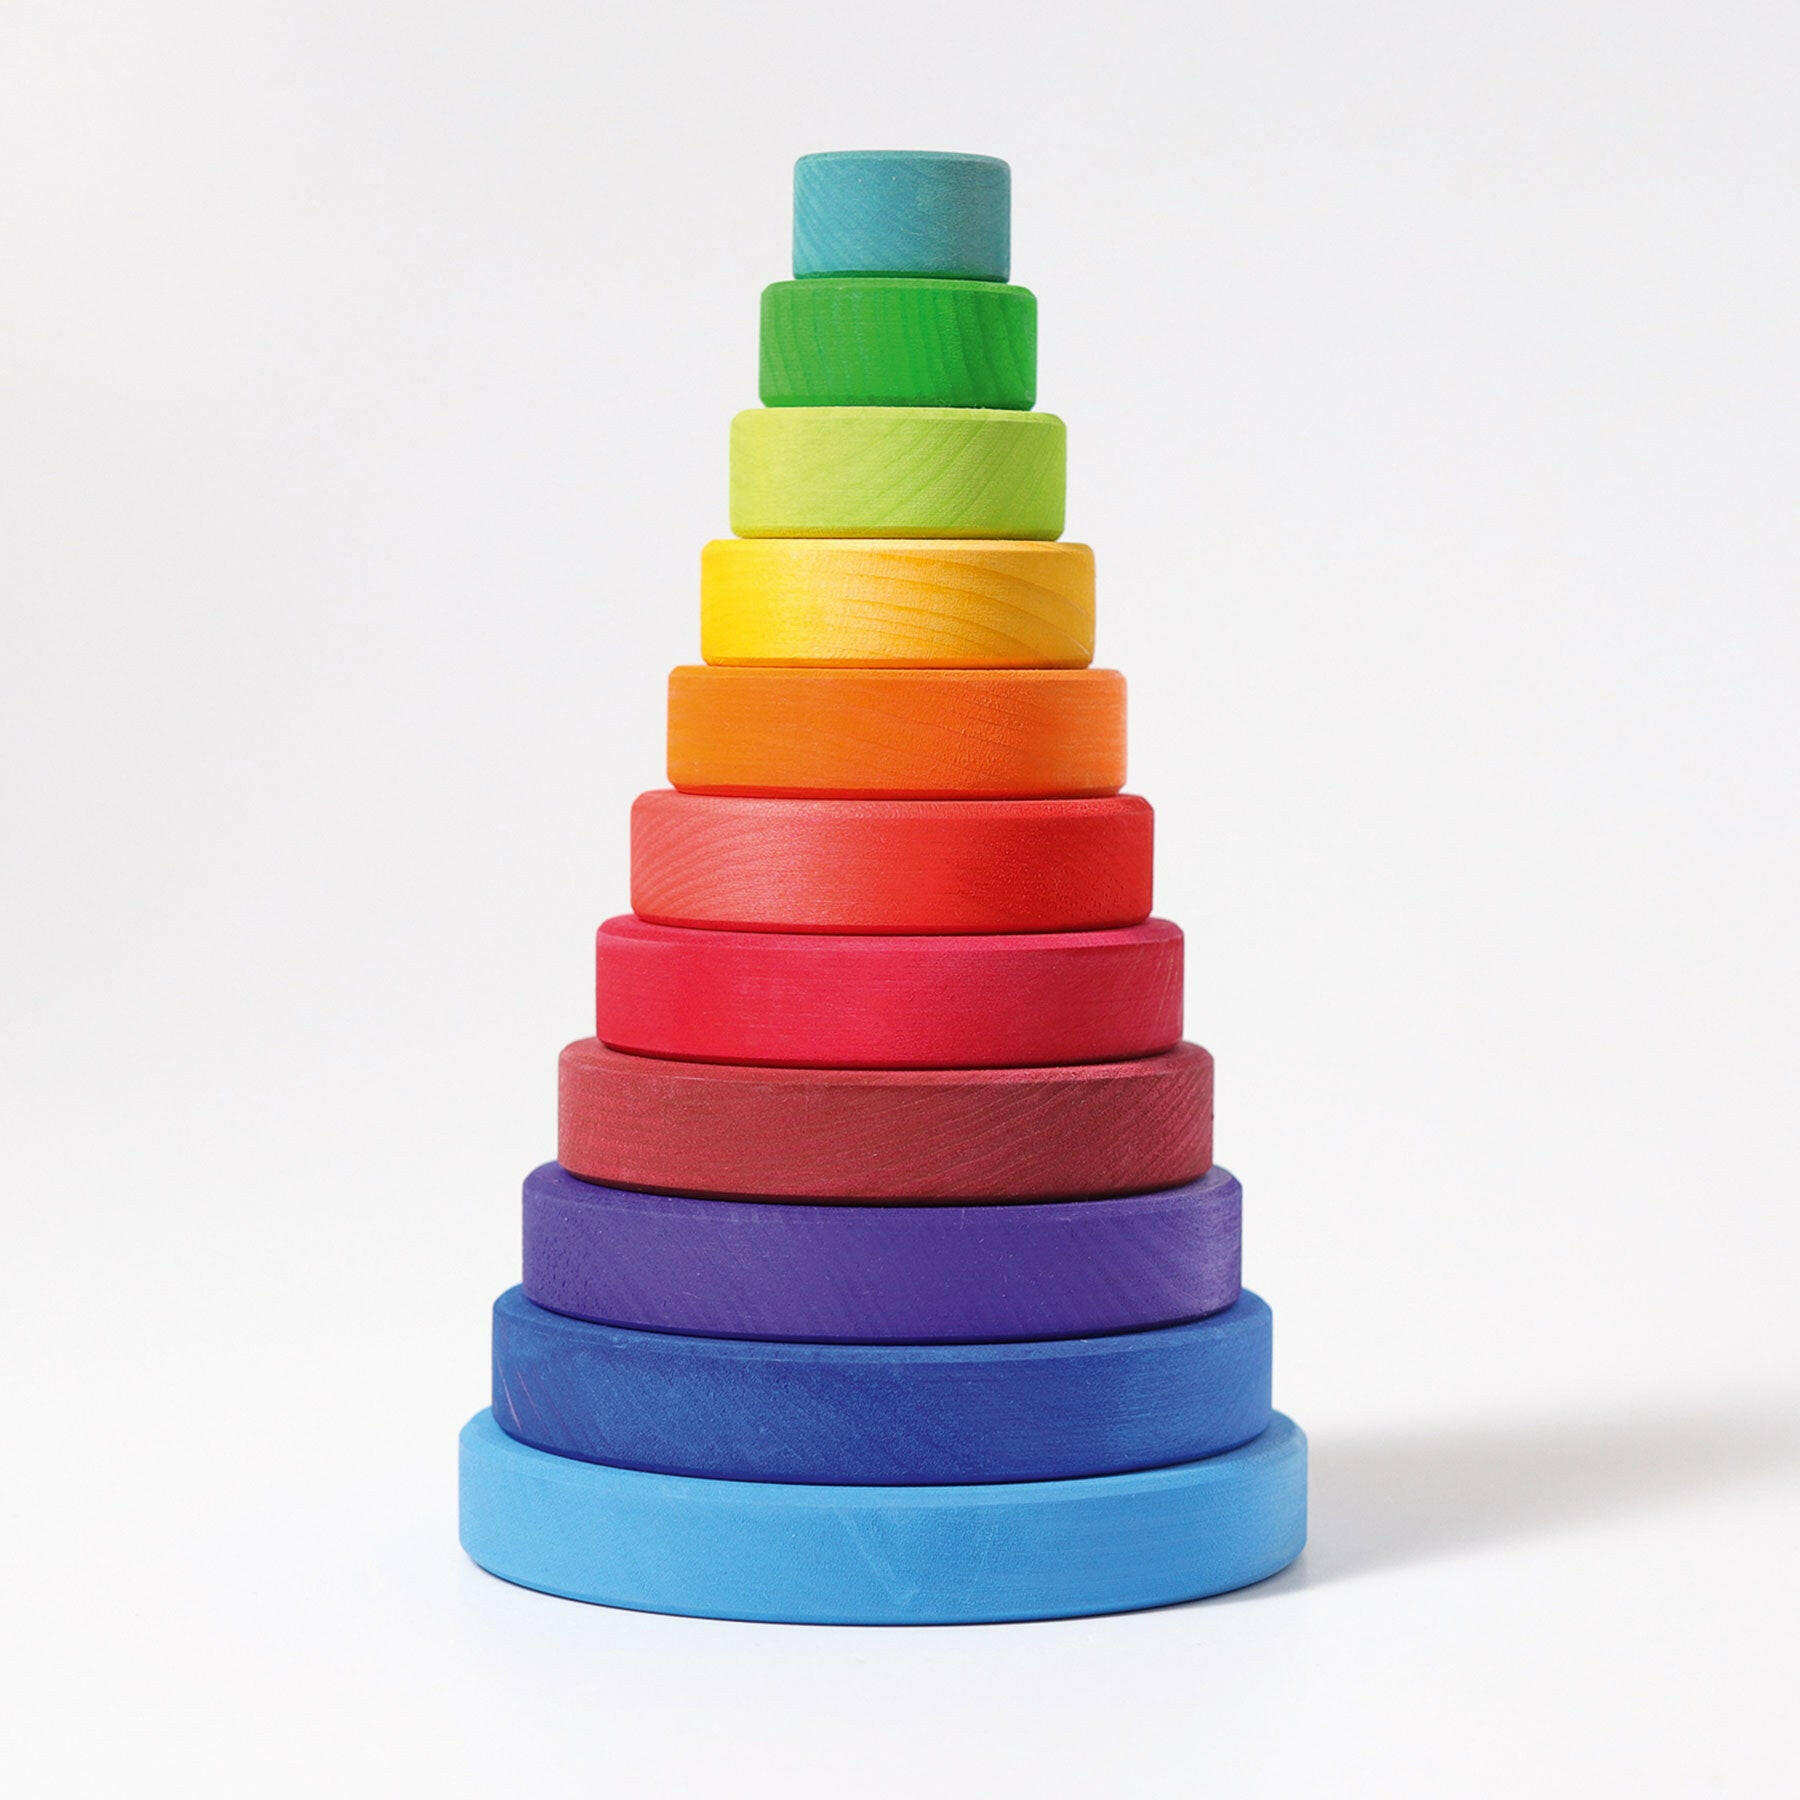 Grimms Conical Wooden Tower Rainbow